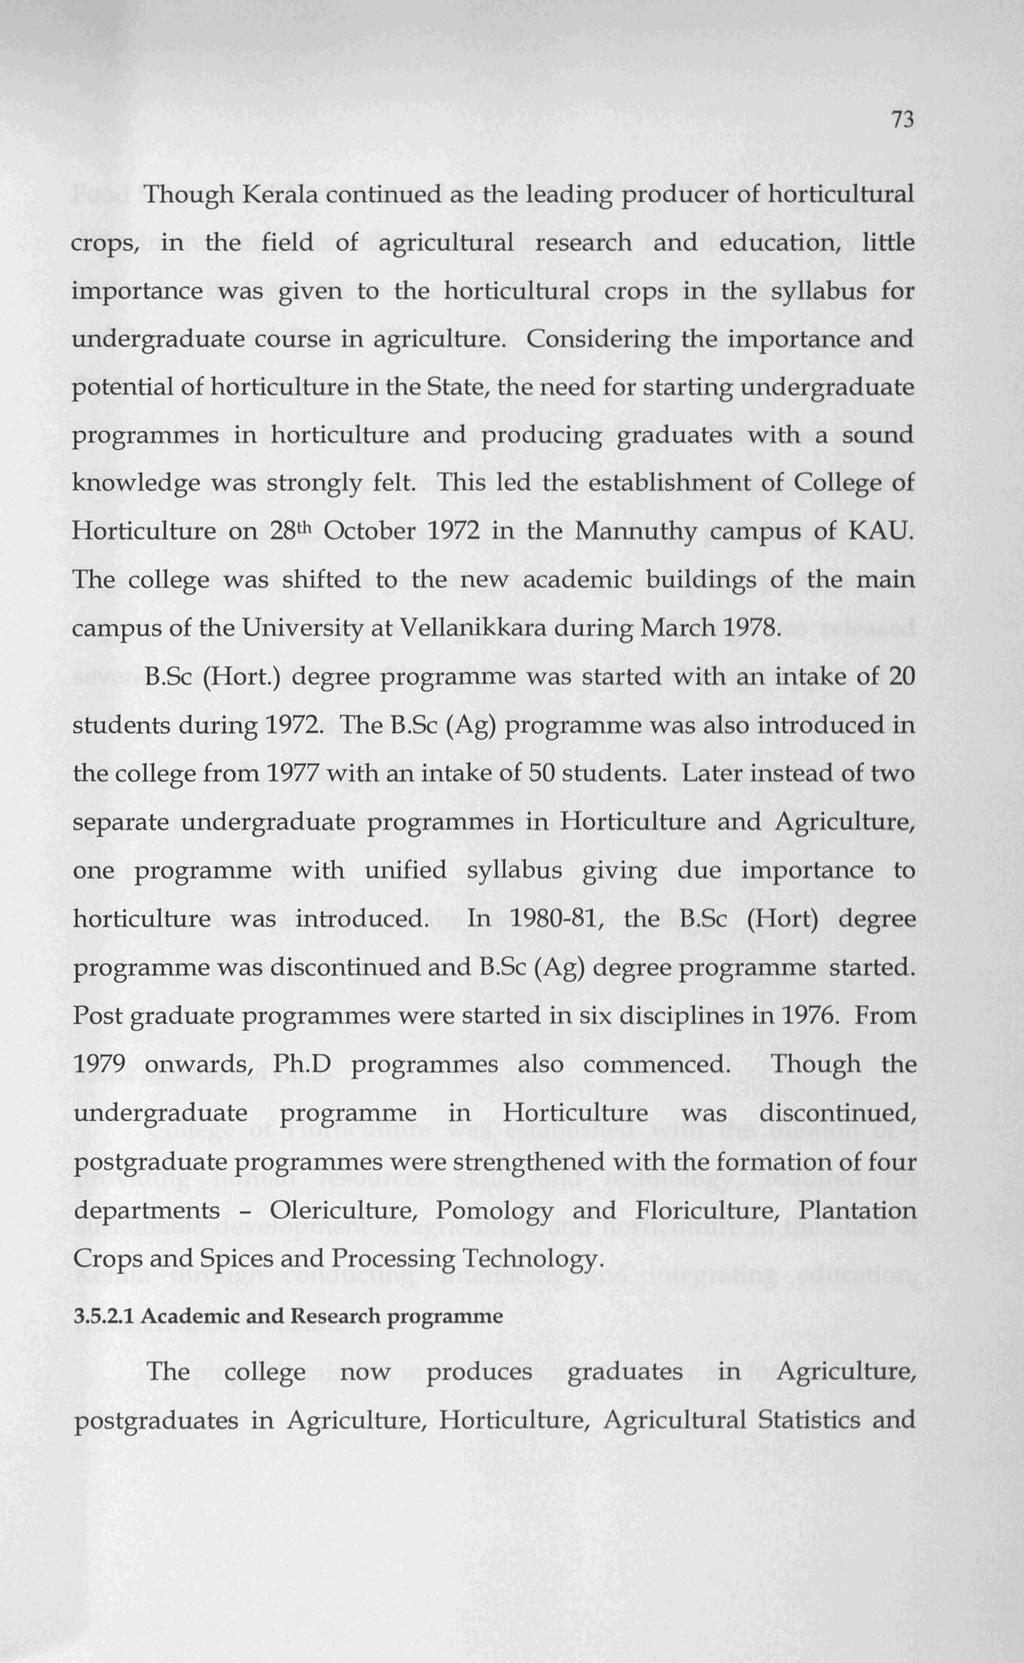 73 Though Kerala continued as the leading producer of horticultural crops, in the field of agricultural research and education, little importance was given to the horticultural crops in the syllabus